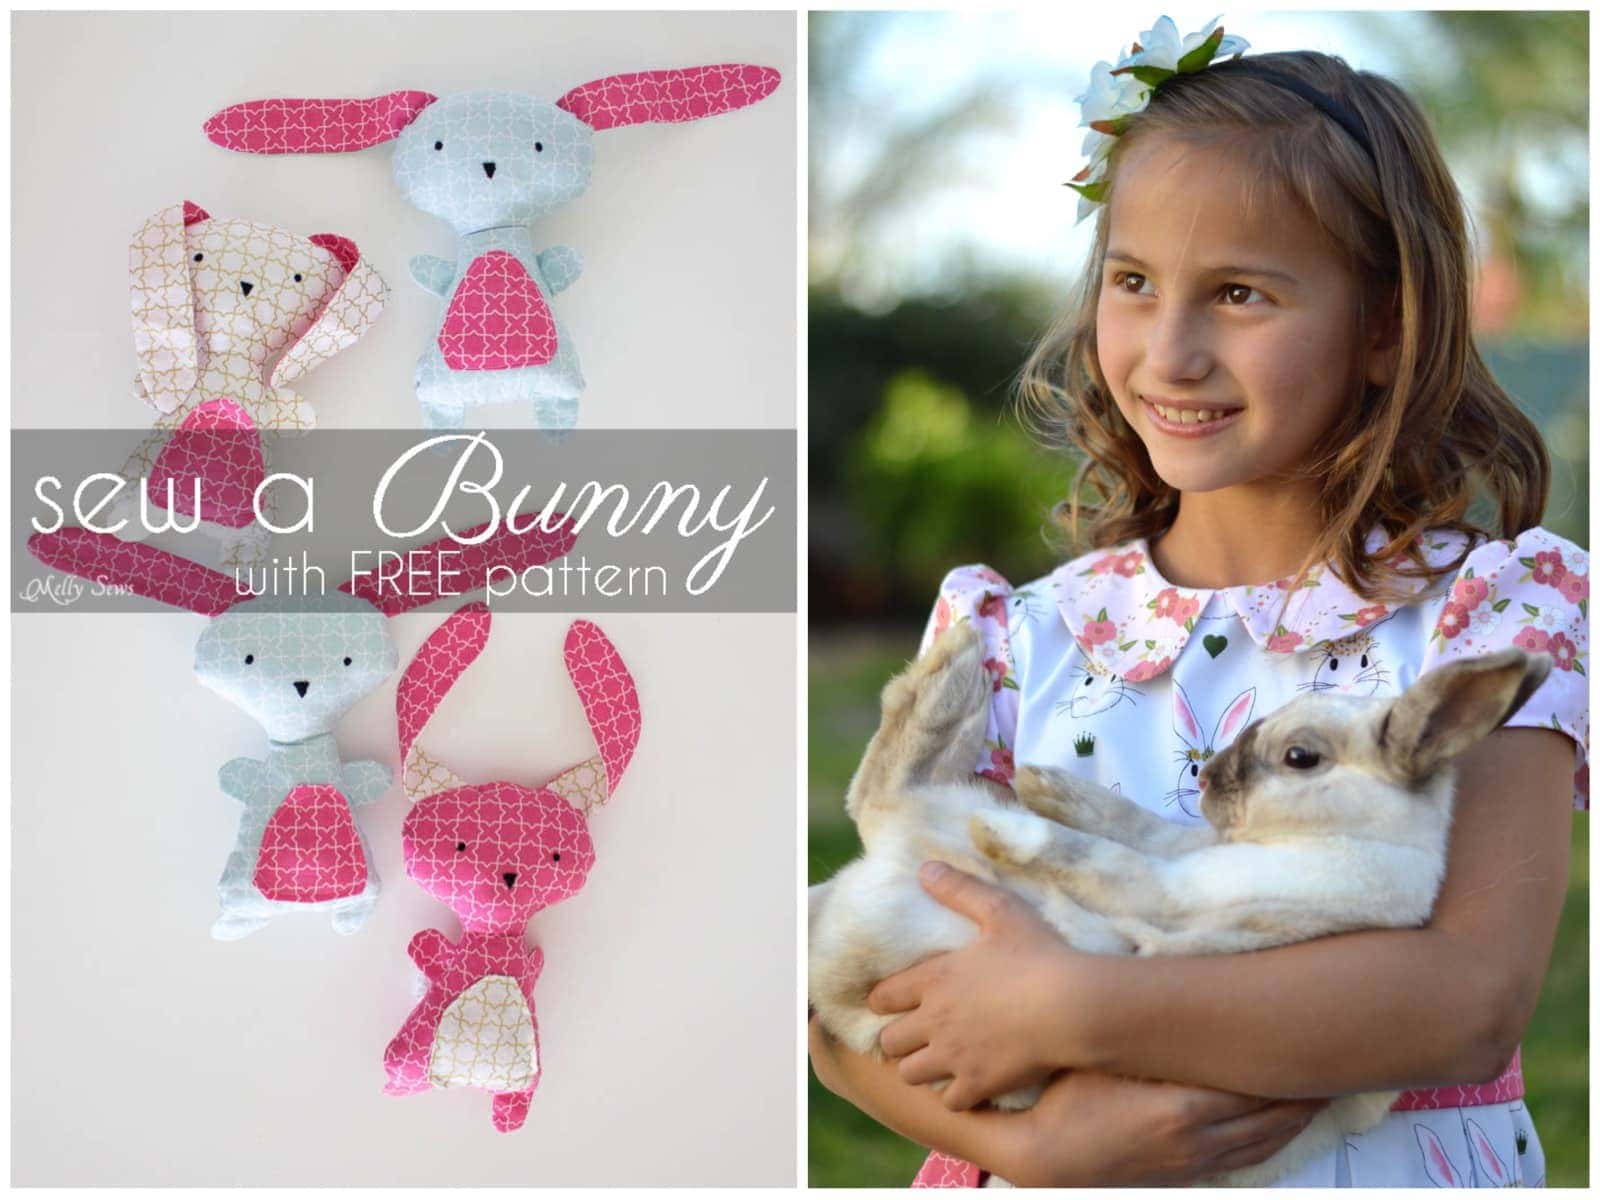 Cute ideas for Easter Sewing Projects, an Easter Dress and  DIY Stuffed Easter Bunny Pattern